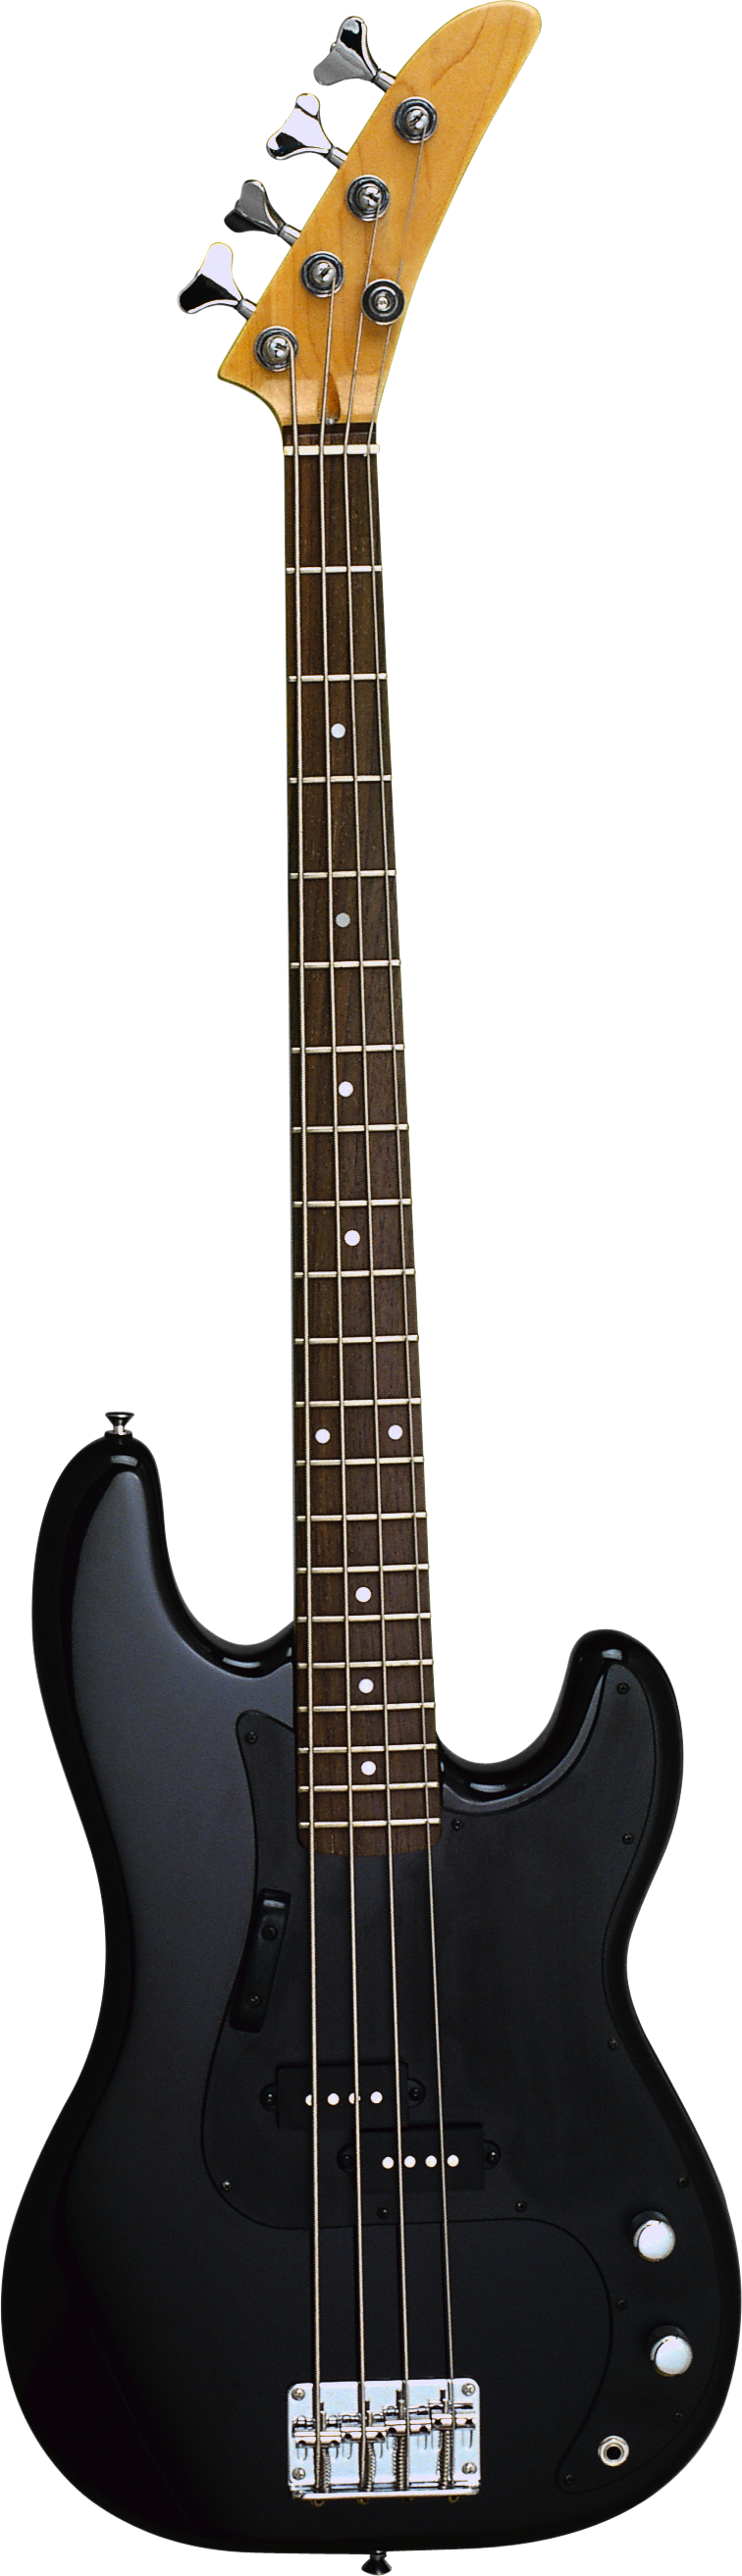 Guitare PNG Telecharger